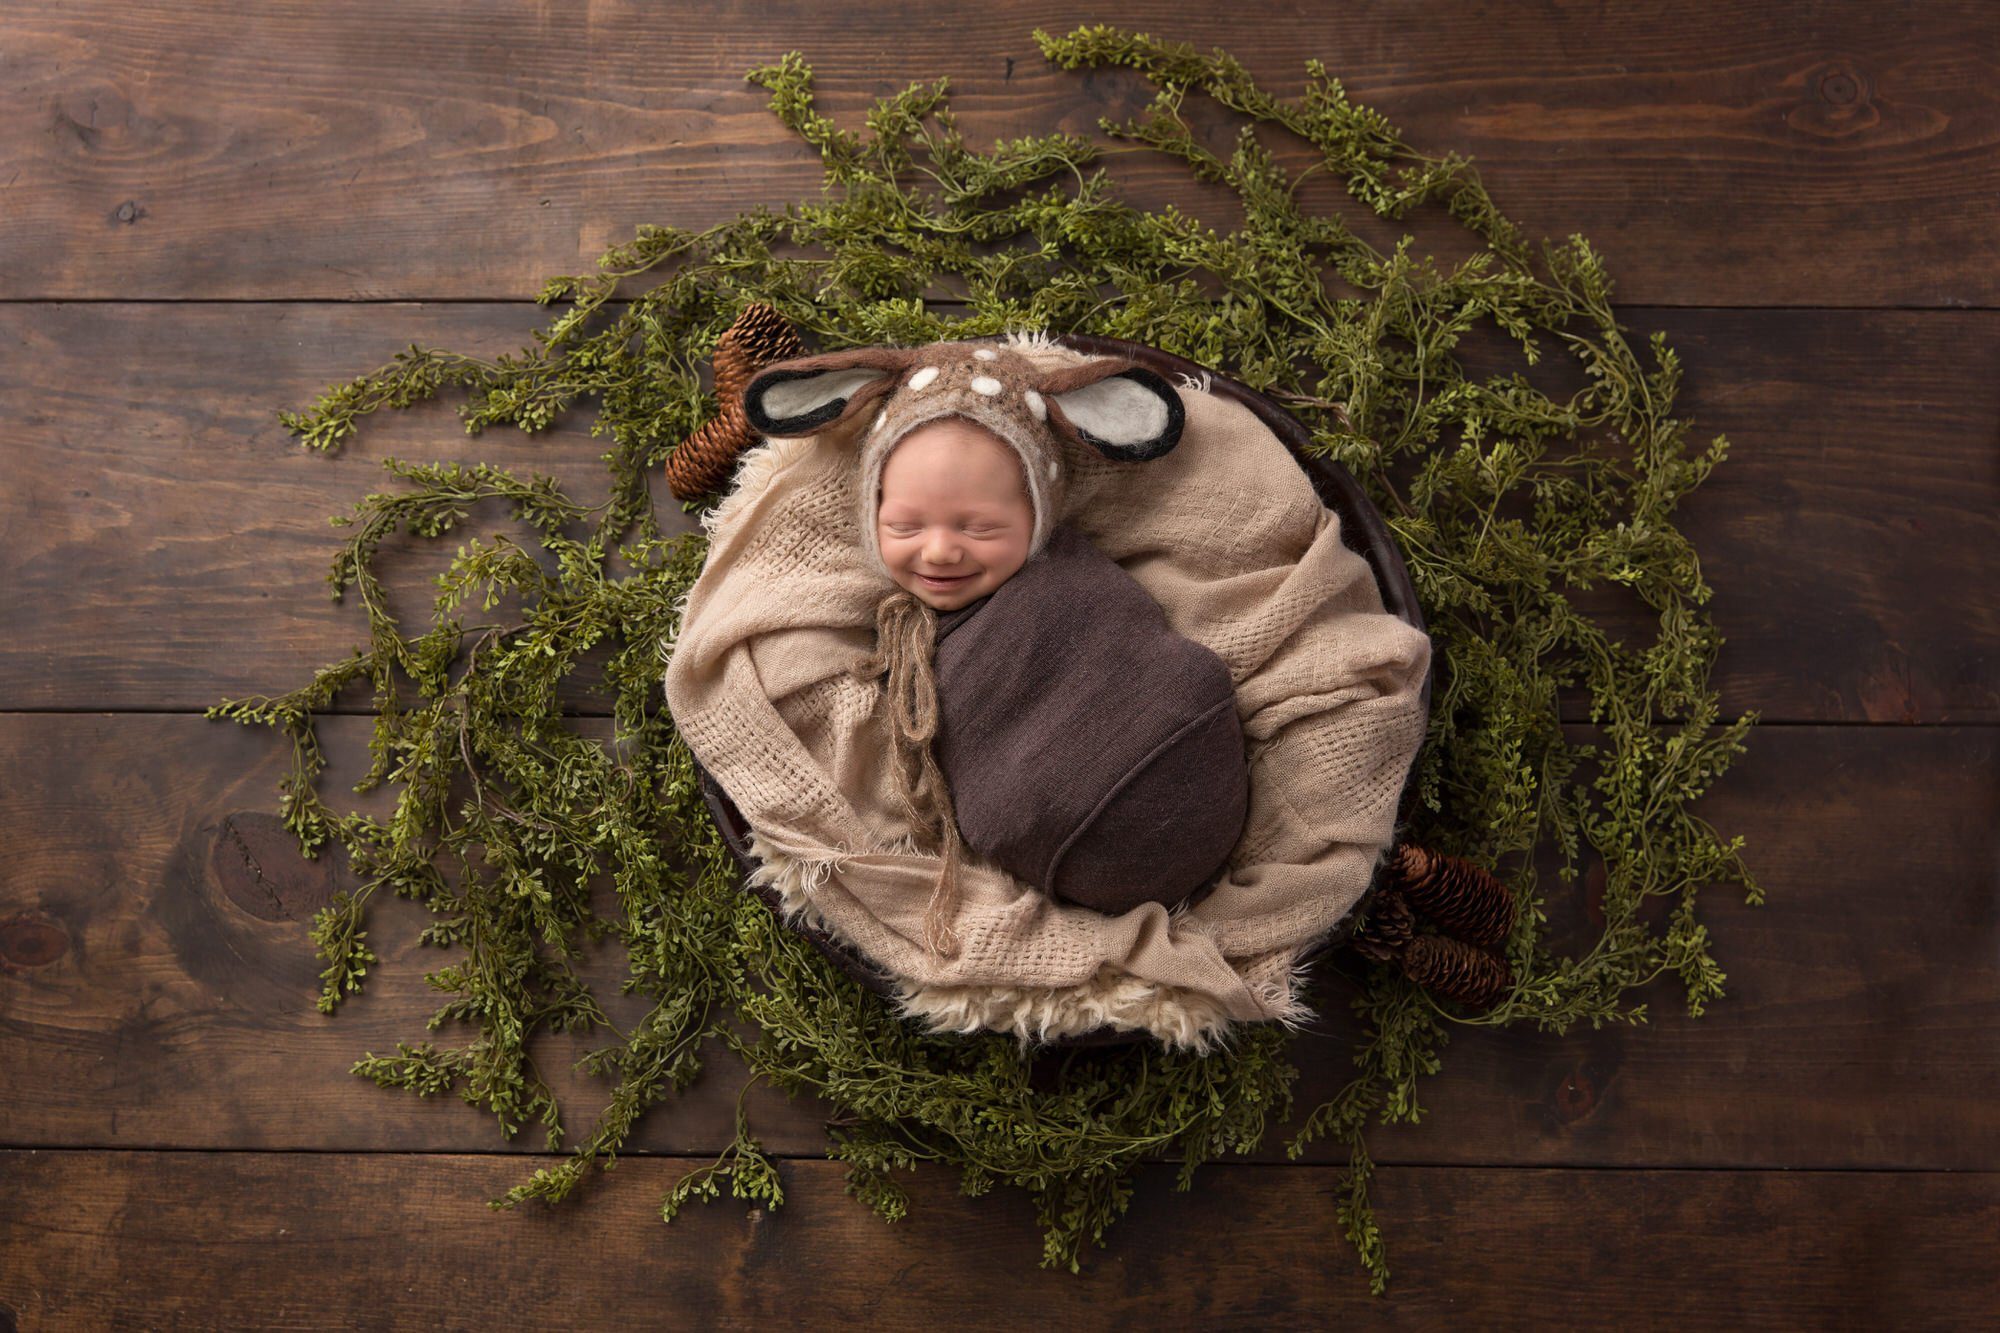 Newborn baby boy laying in a bowl with greenery around him. Photo by Pueblo-Colorado Springs photographer K.D. Elise Photography.